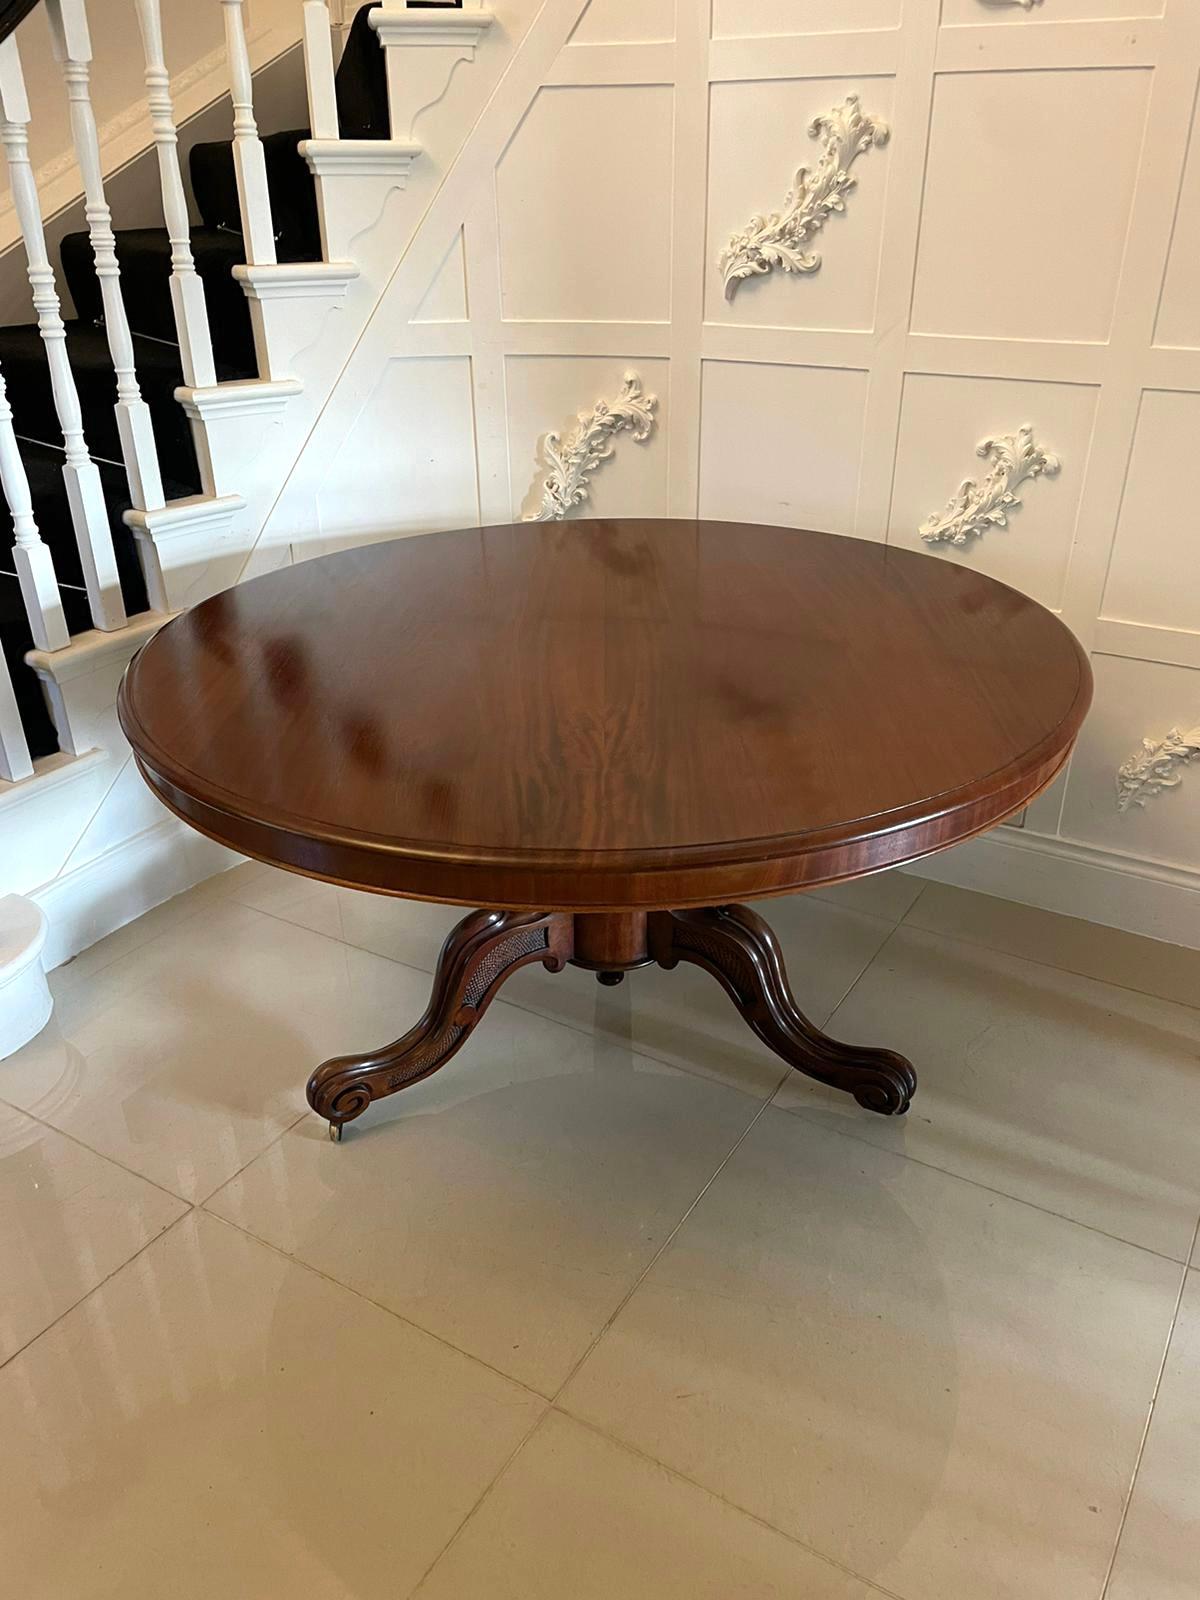 Large Antique Victorian quality figured mahogany circular centre table having a large quality figured mahogany circular shaped tilting top with a moulded edge supported by a shaped turned mahogany column pedestal standing on shaped carved cabriole